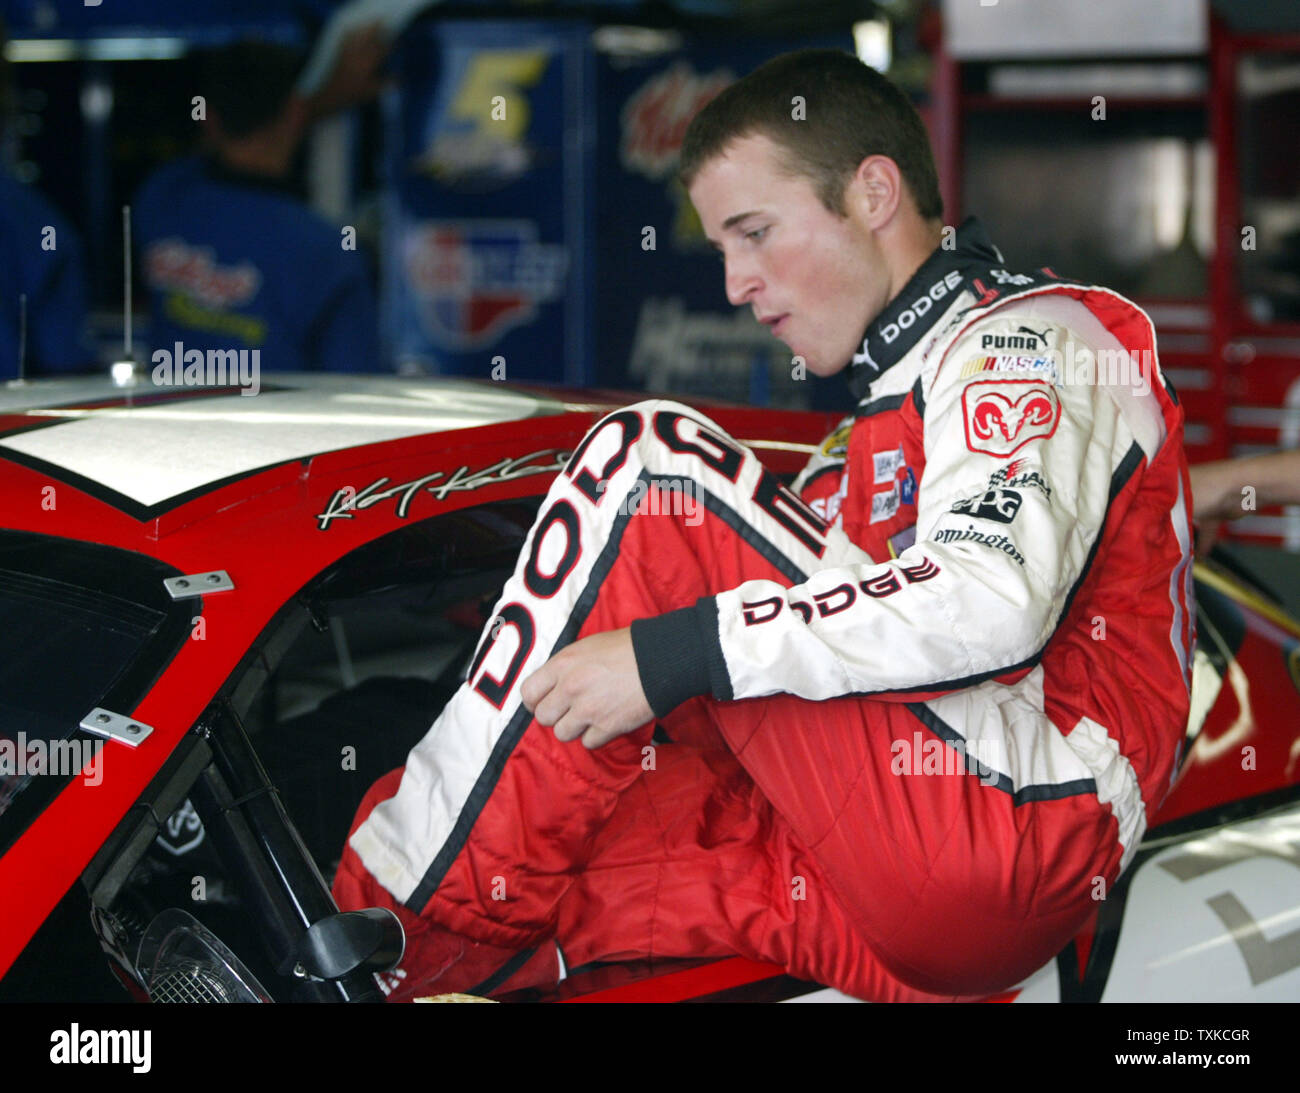 NASCAR race car driver Kasey Kahne climbs into his race car before the start of Nextel Cup practice for the Coca-Cola 600 at the Lowe's Motor Speedway in Charlotte, N.C., on May 27, 2006. (UPI Photo/Nell Redmond) Stock Photo